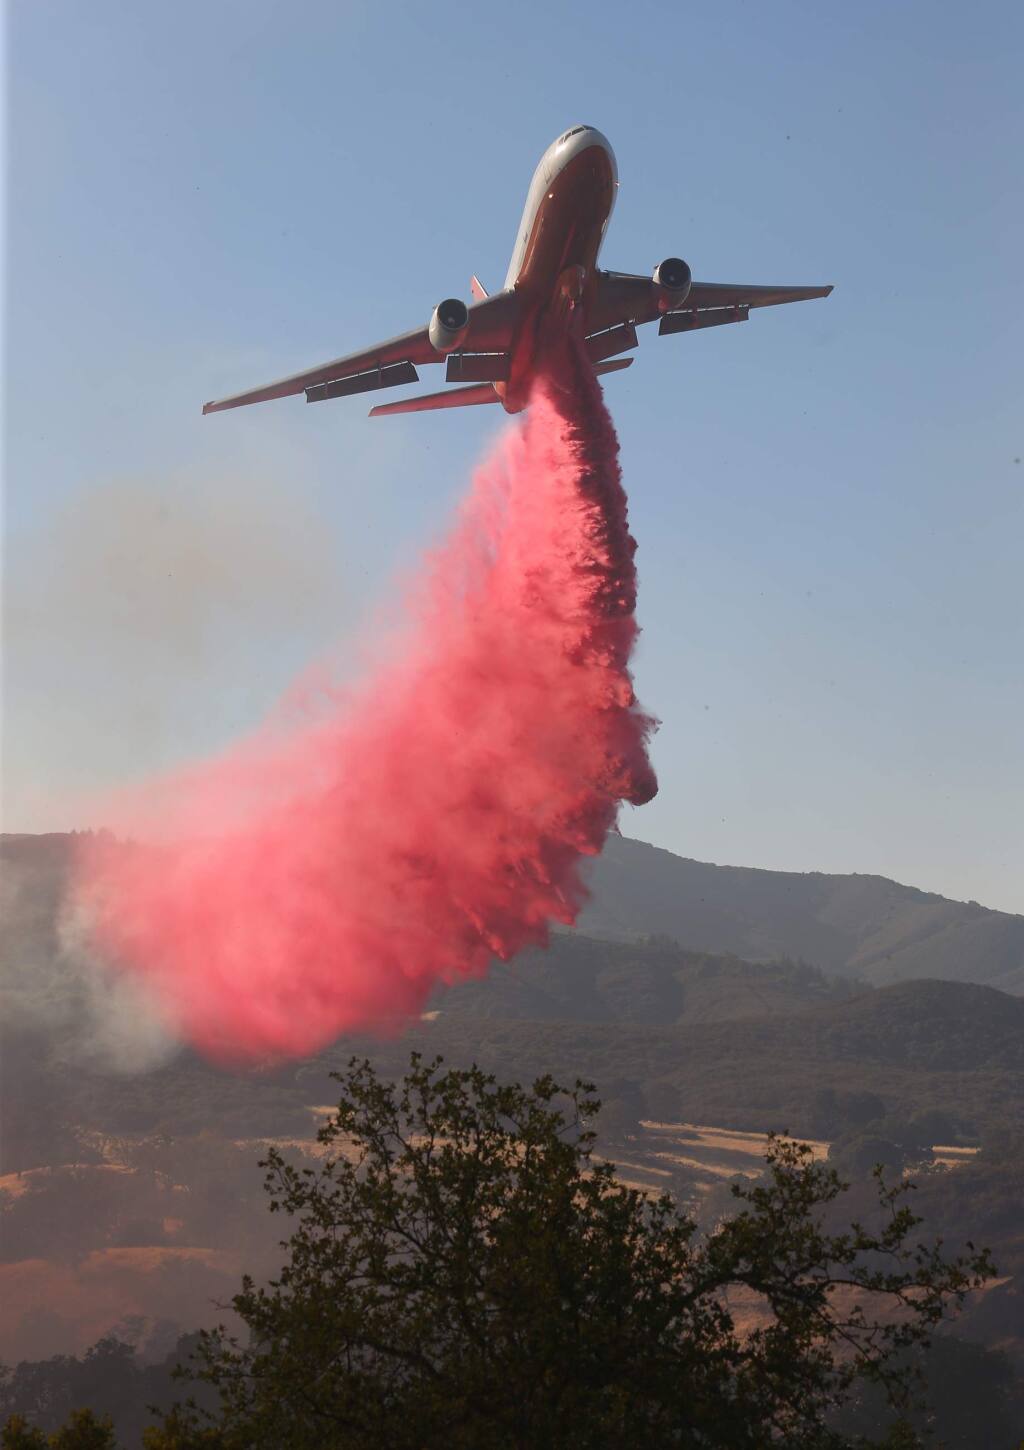 An air tanker drops fire retardant on a ridge near Hendricks Road in Lakeport on Wednesday, Aug. 1, 2018. (CHRISTOPHER CHUNG/ PD)